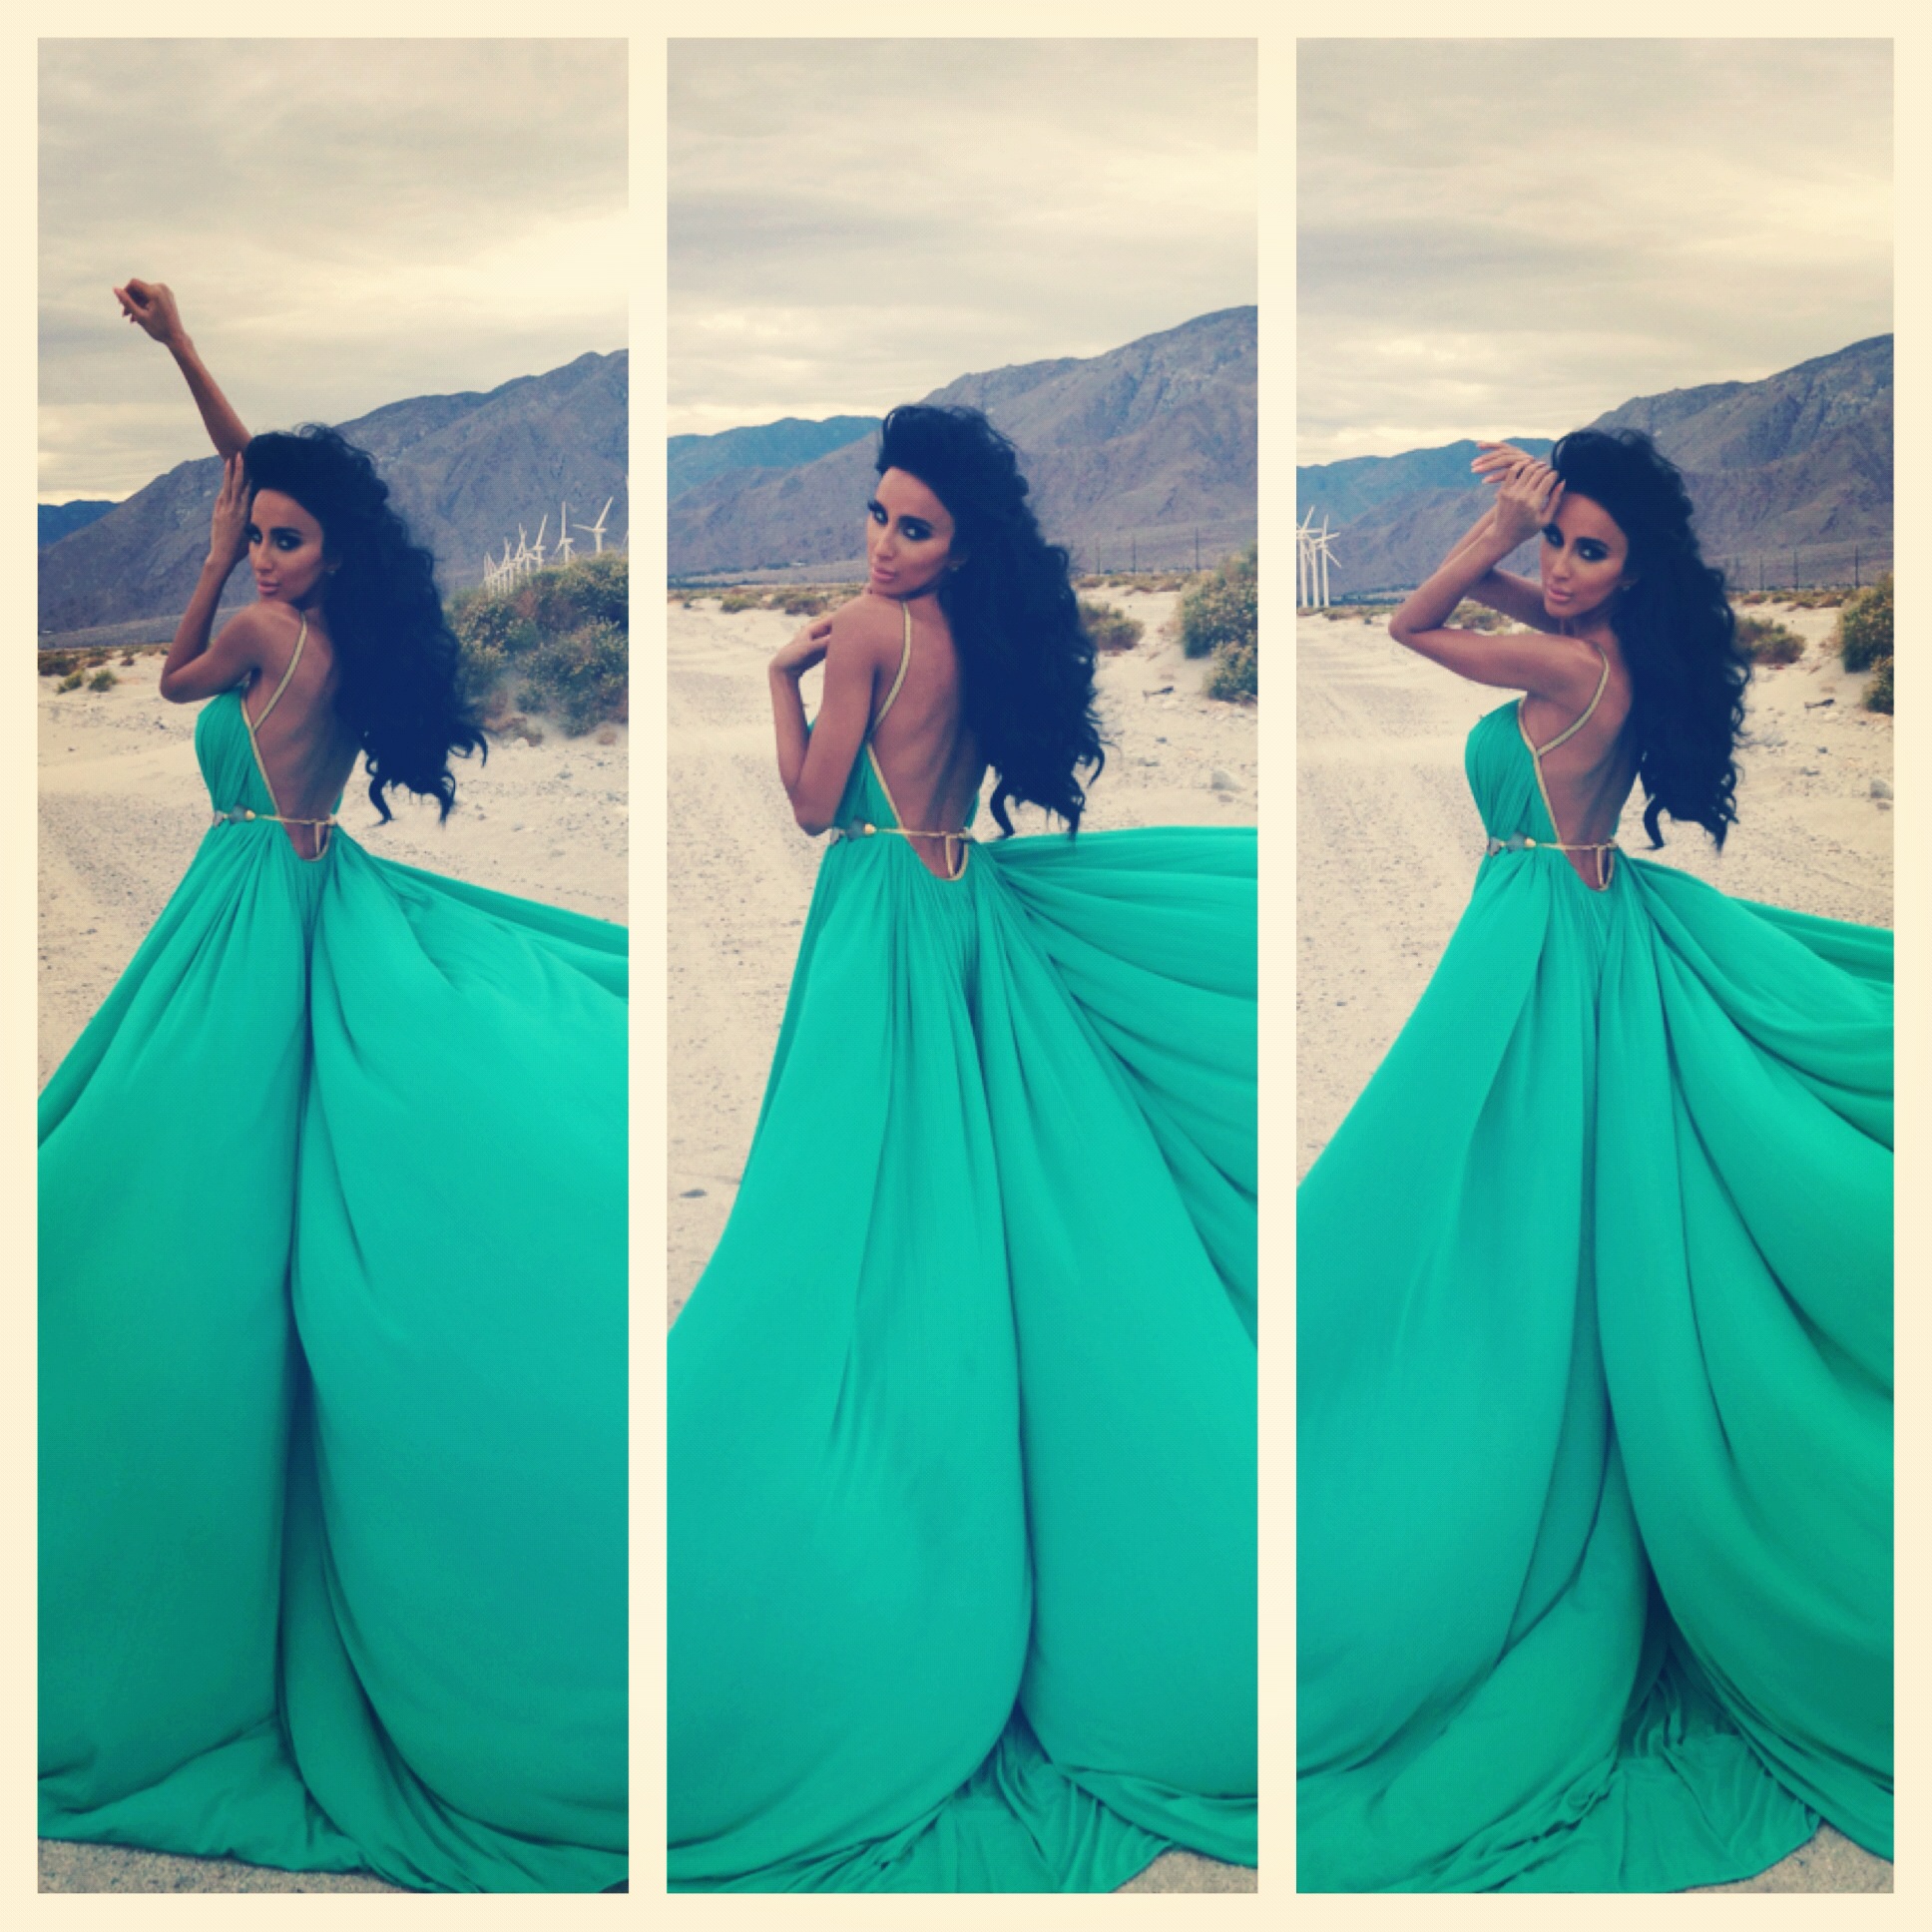 Lilly Ghalichi Official Website Lilly Ghalichi